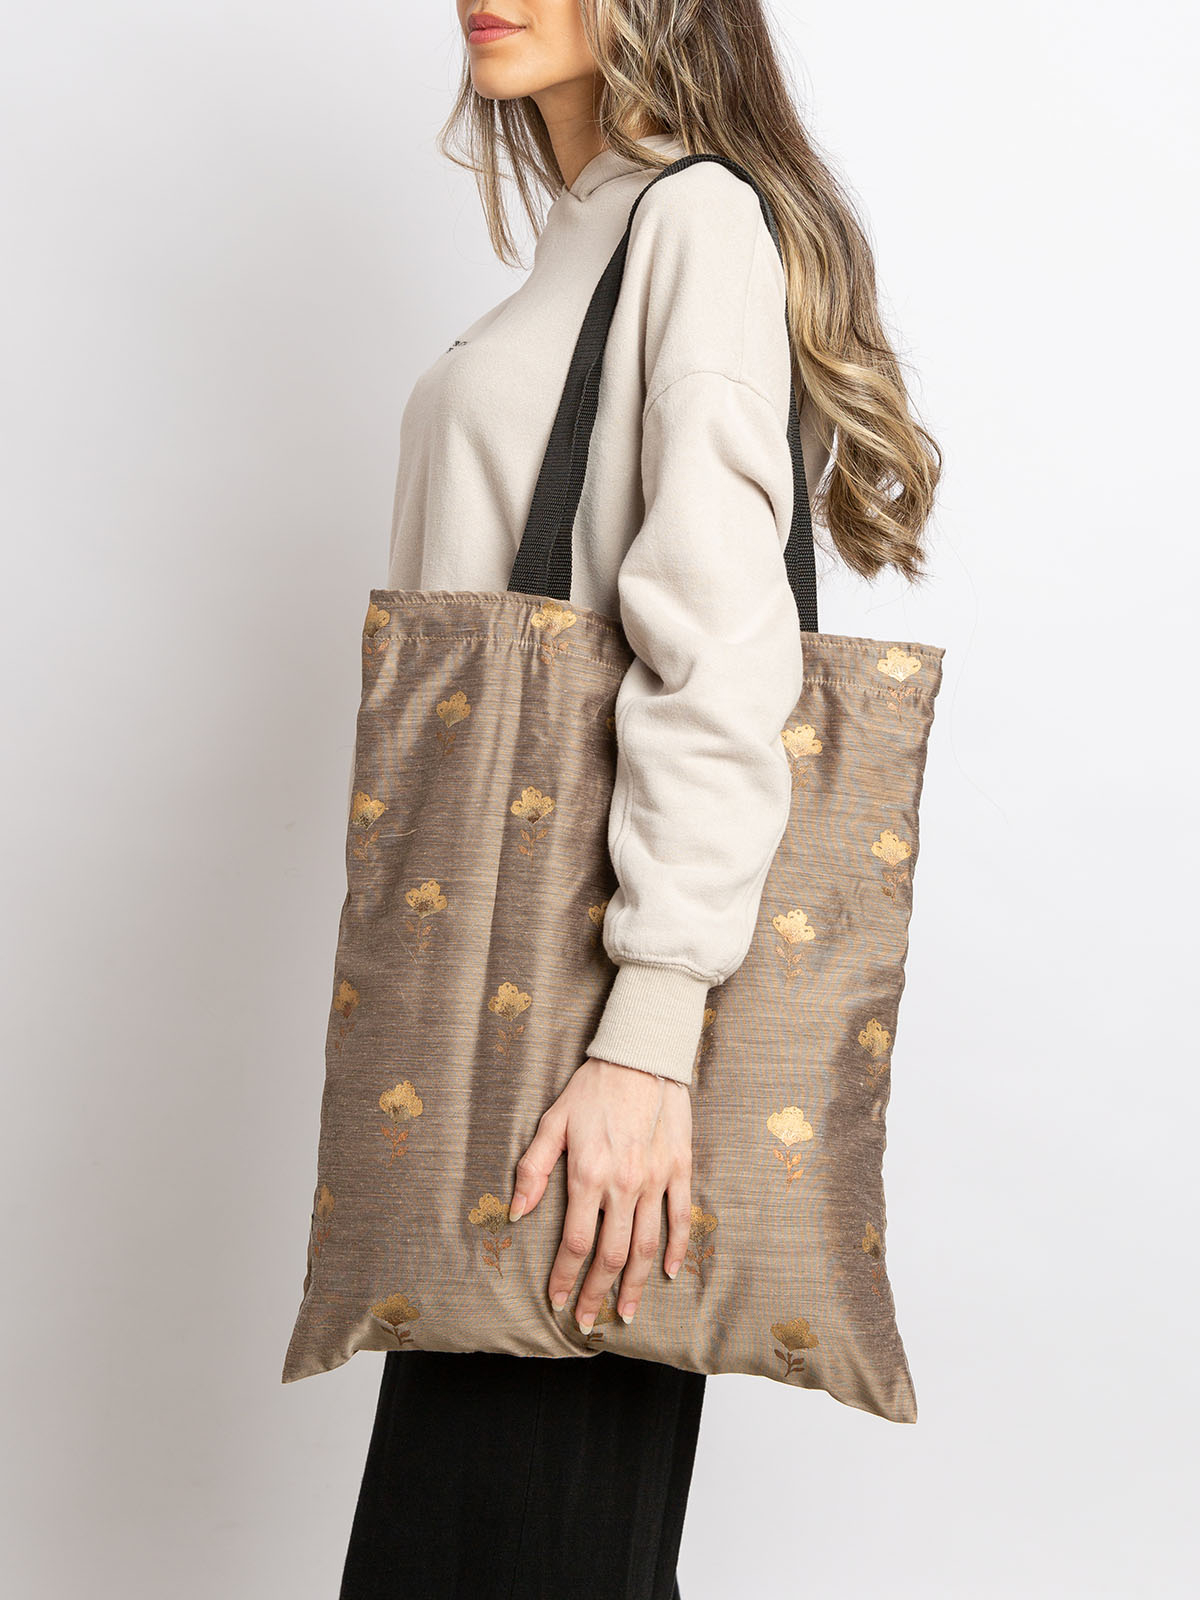 Brown with Golden Floral - Eco-Friendly Tote Bag